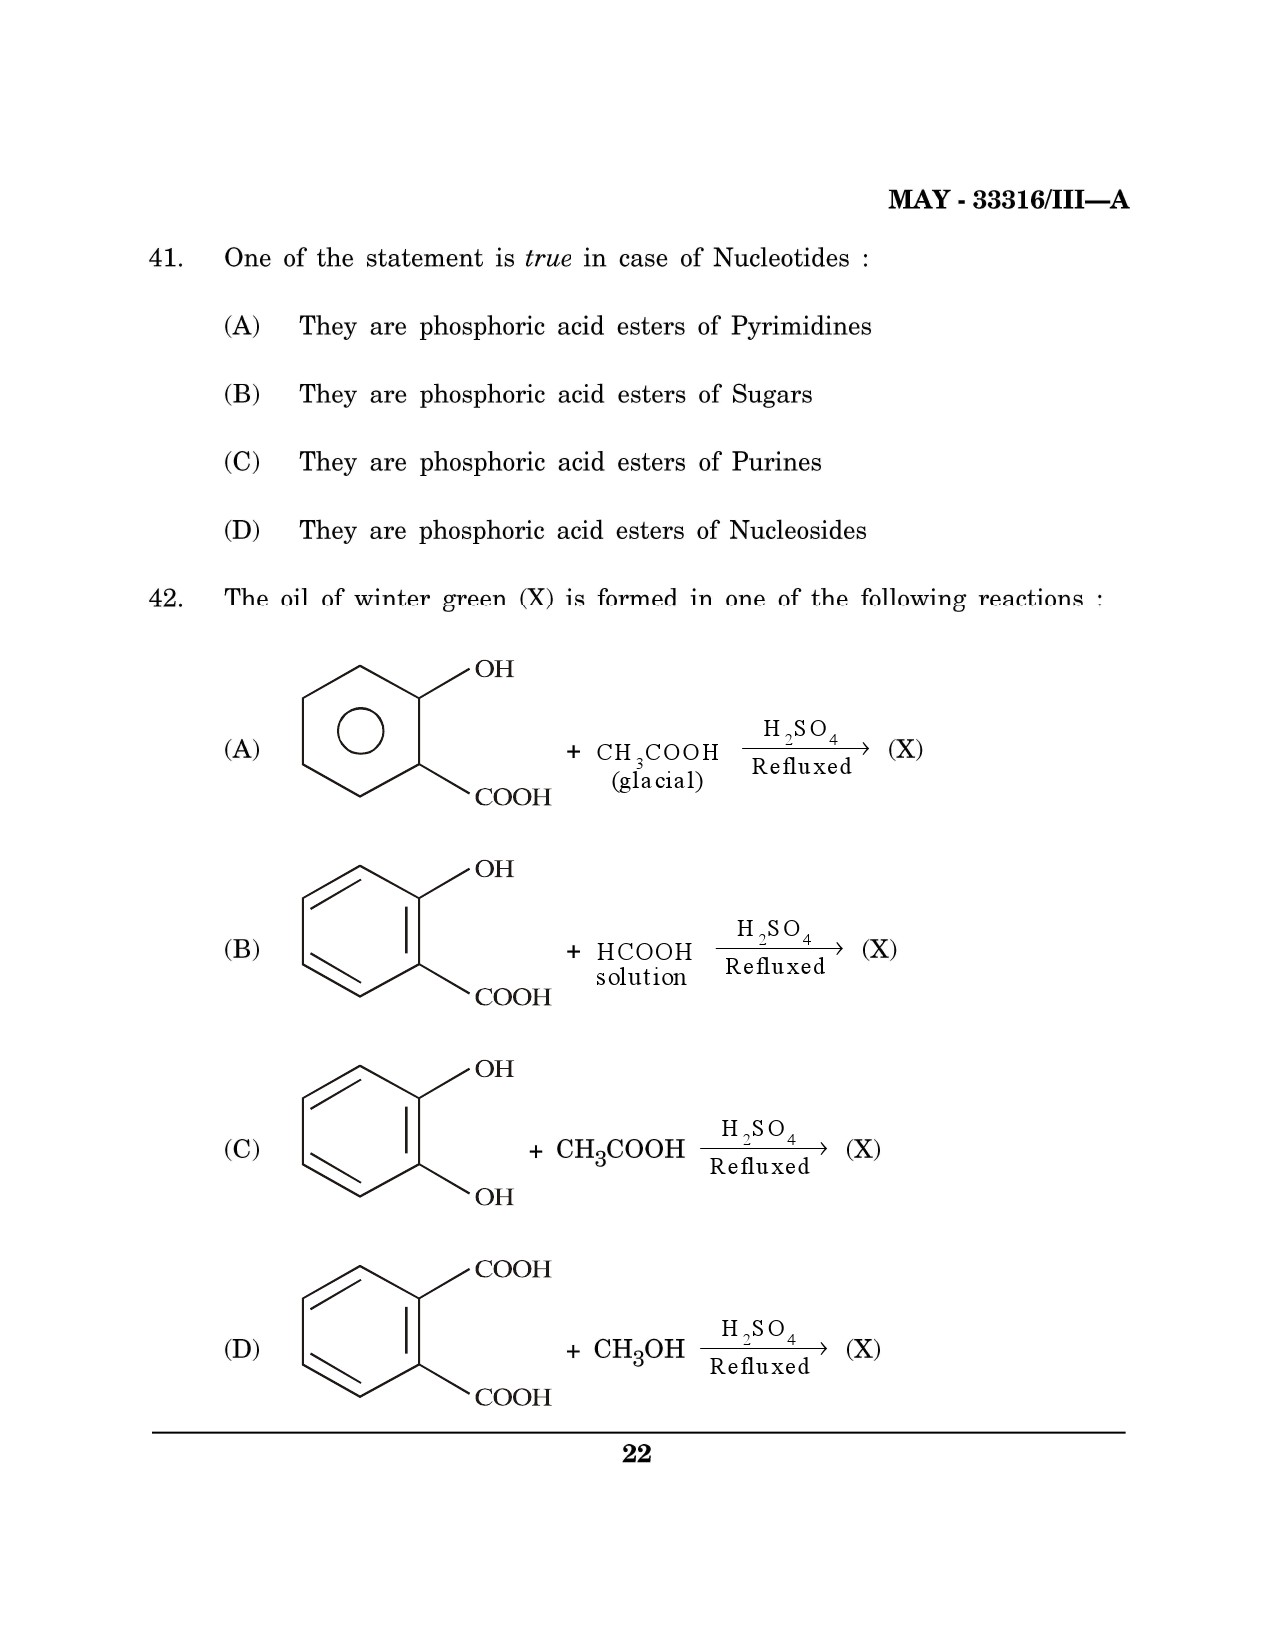 Maharashtra SET Chemical Sciences Question Paper III May 2016 21